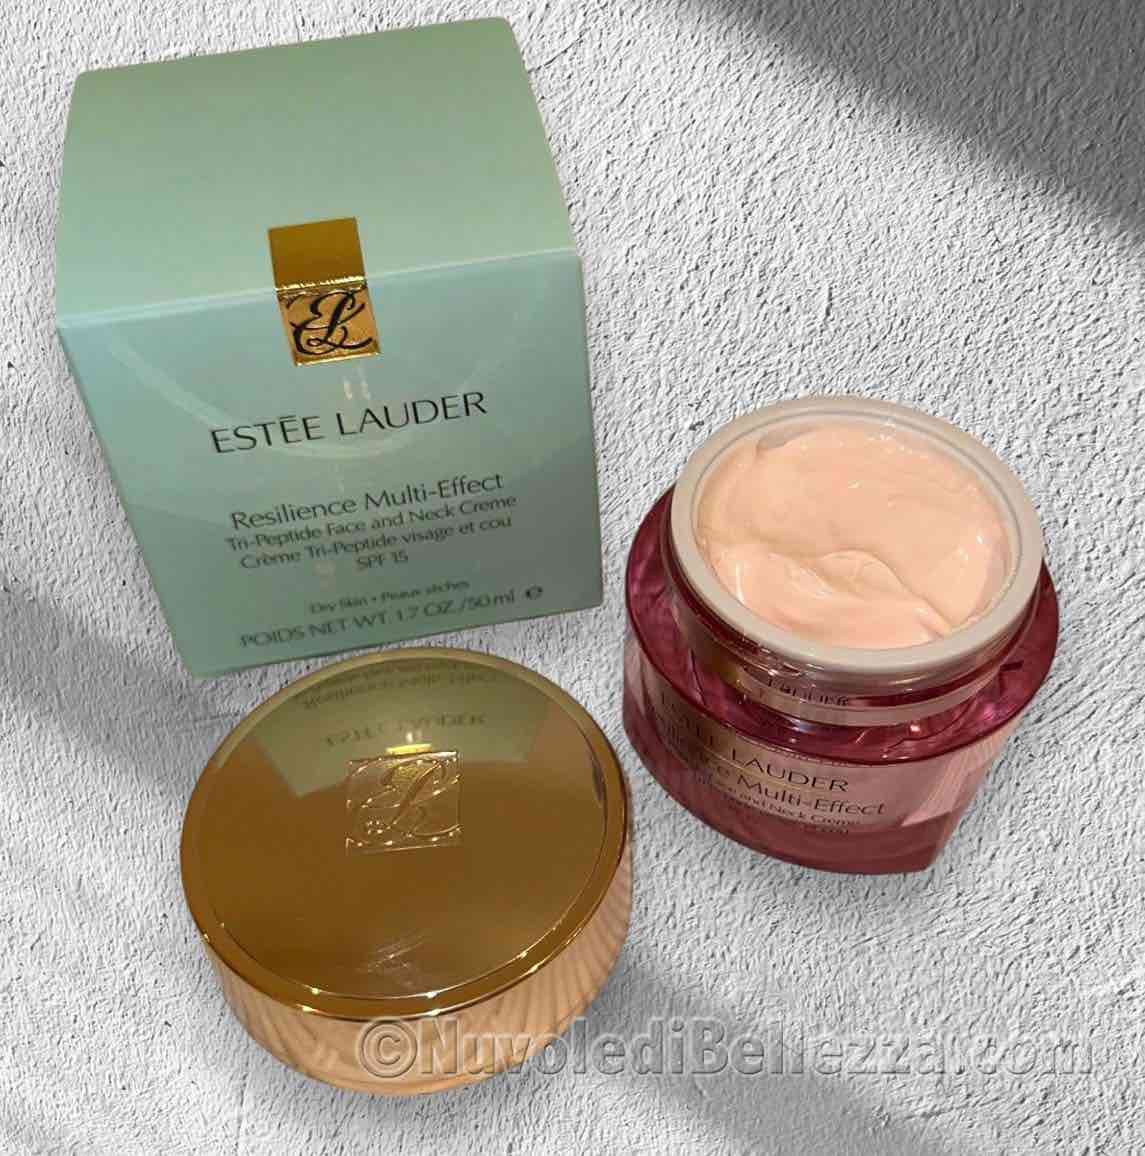 Estee Lauder Resilience Multi-Effect Firming Lifting SPF 15 Opinioni